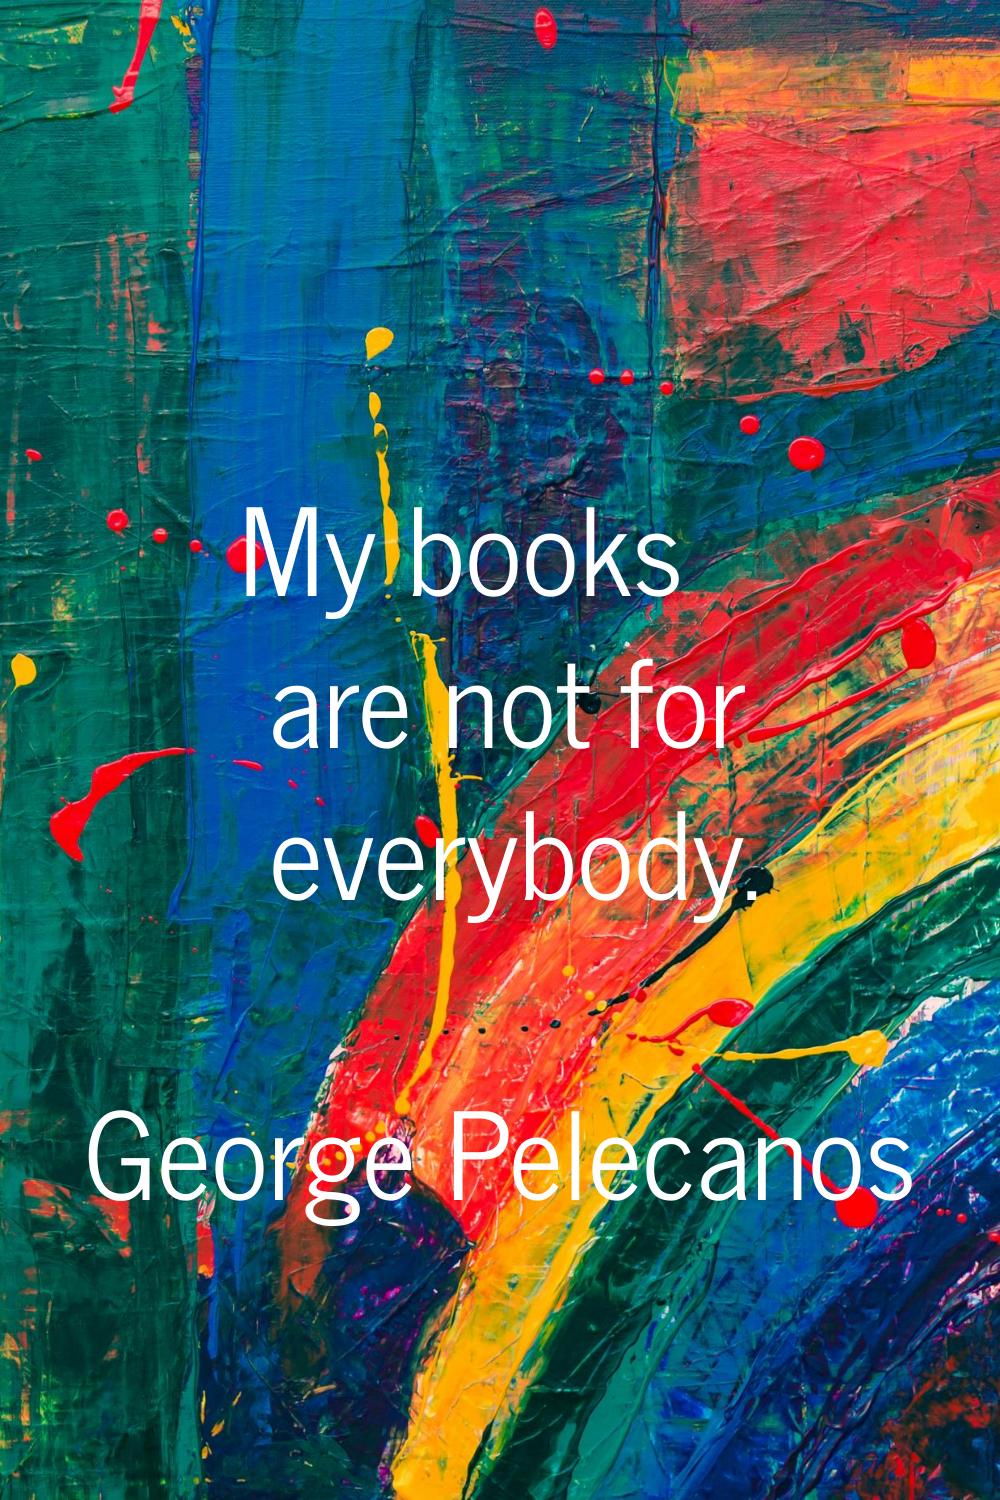 My books are not for everybody.